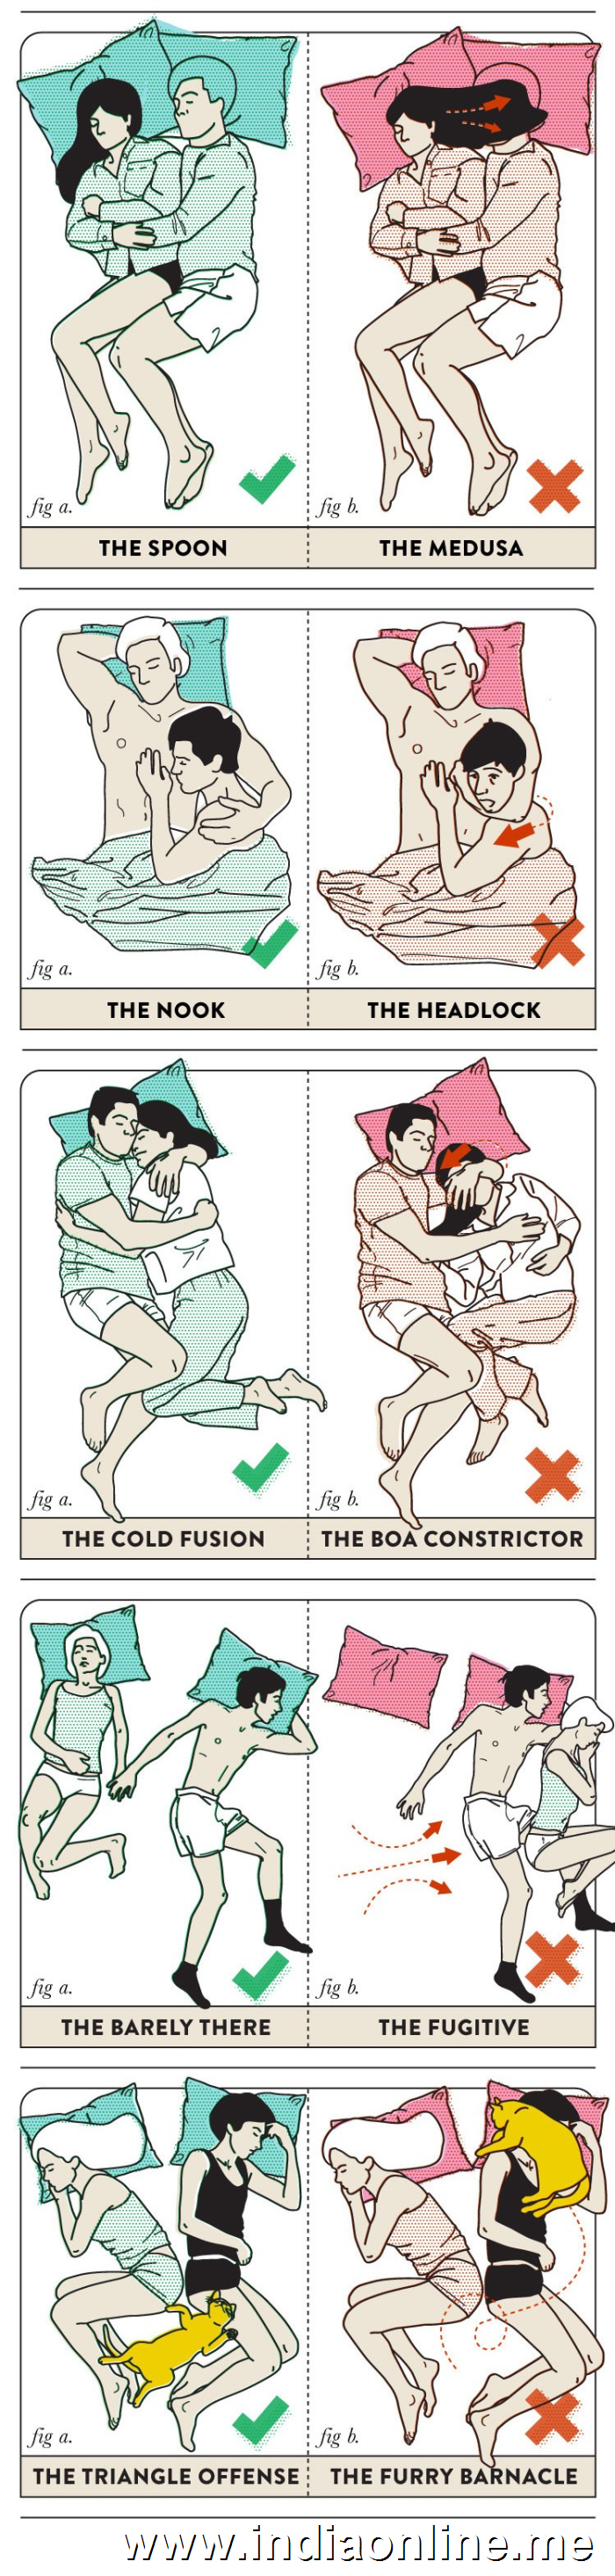 Sleeping positions for couples